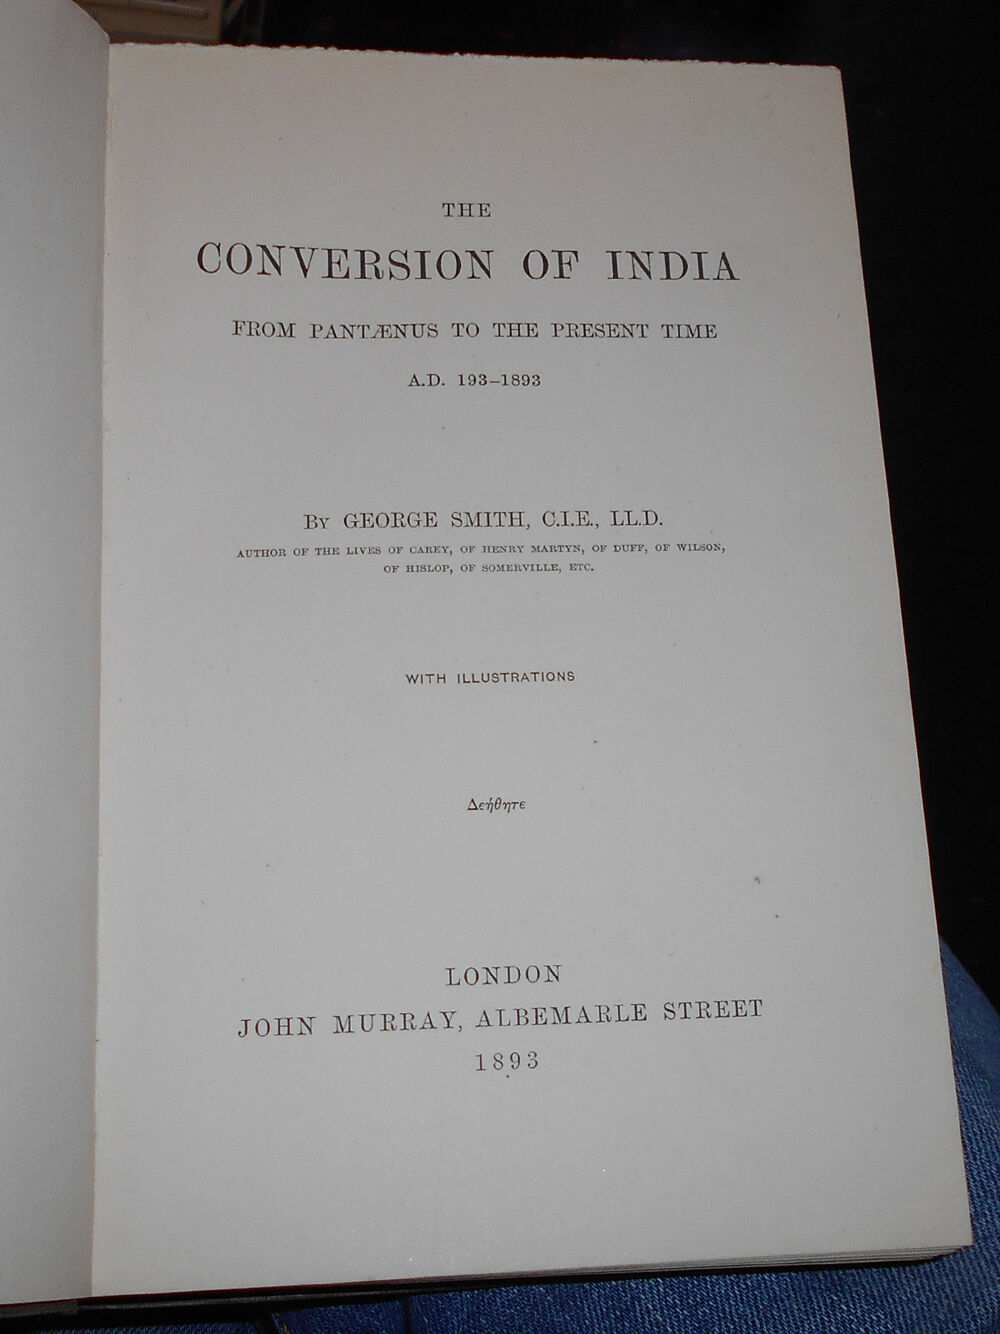 1893 The Conversion of India, from Pantaenus to the Present Time - George Smith